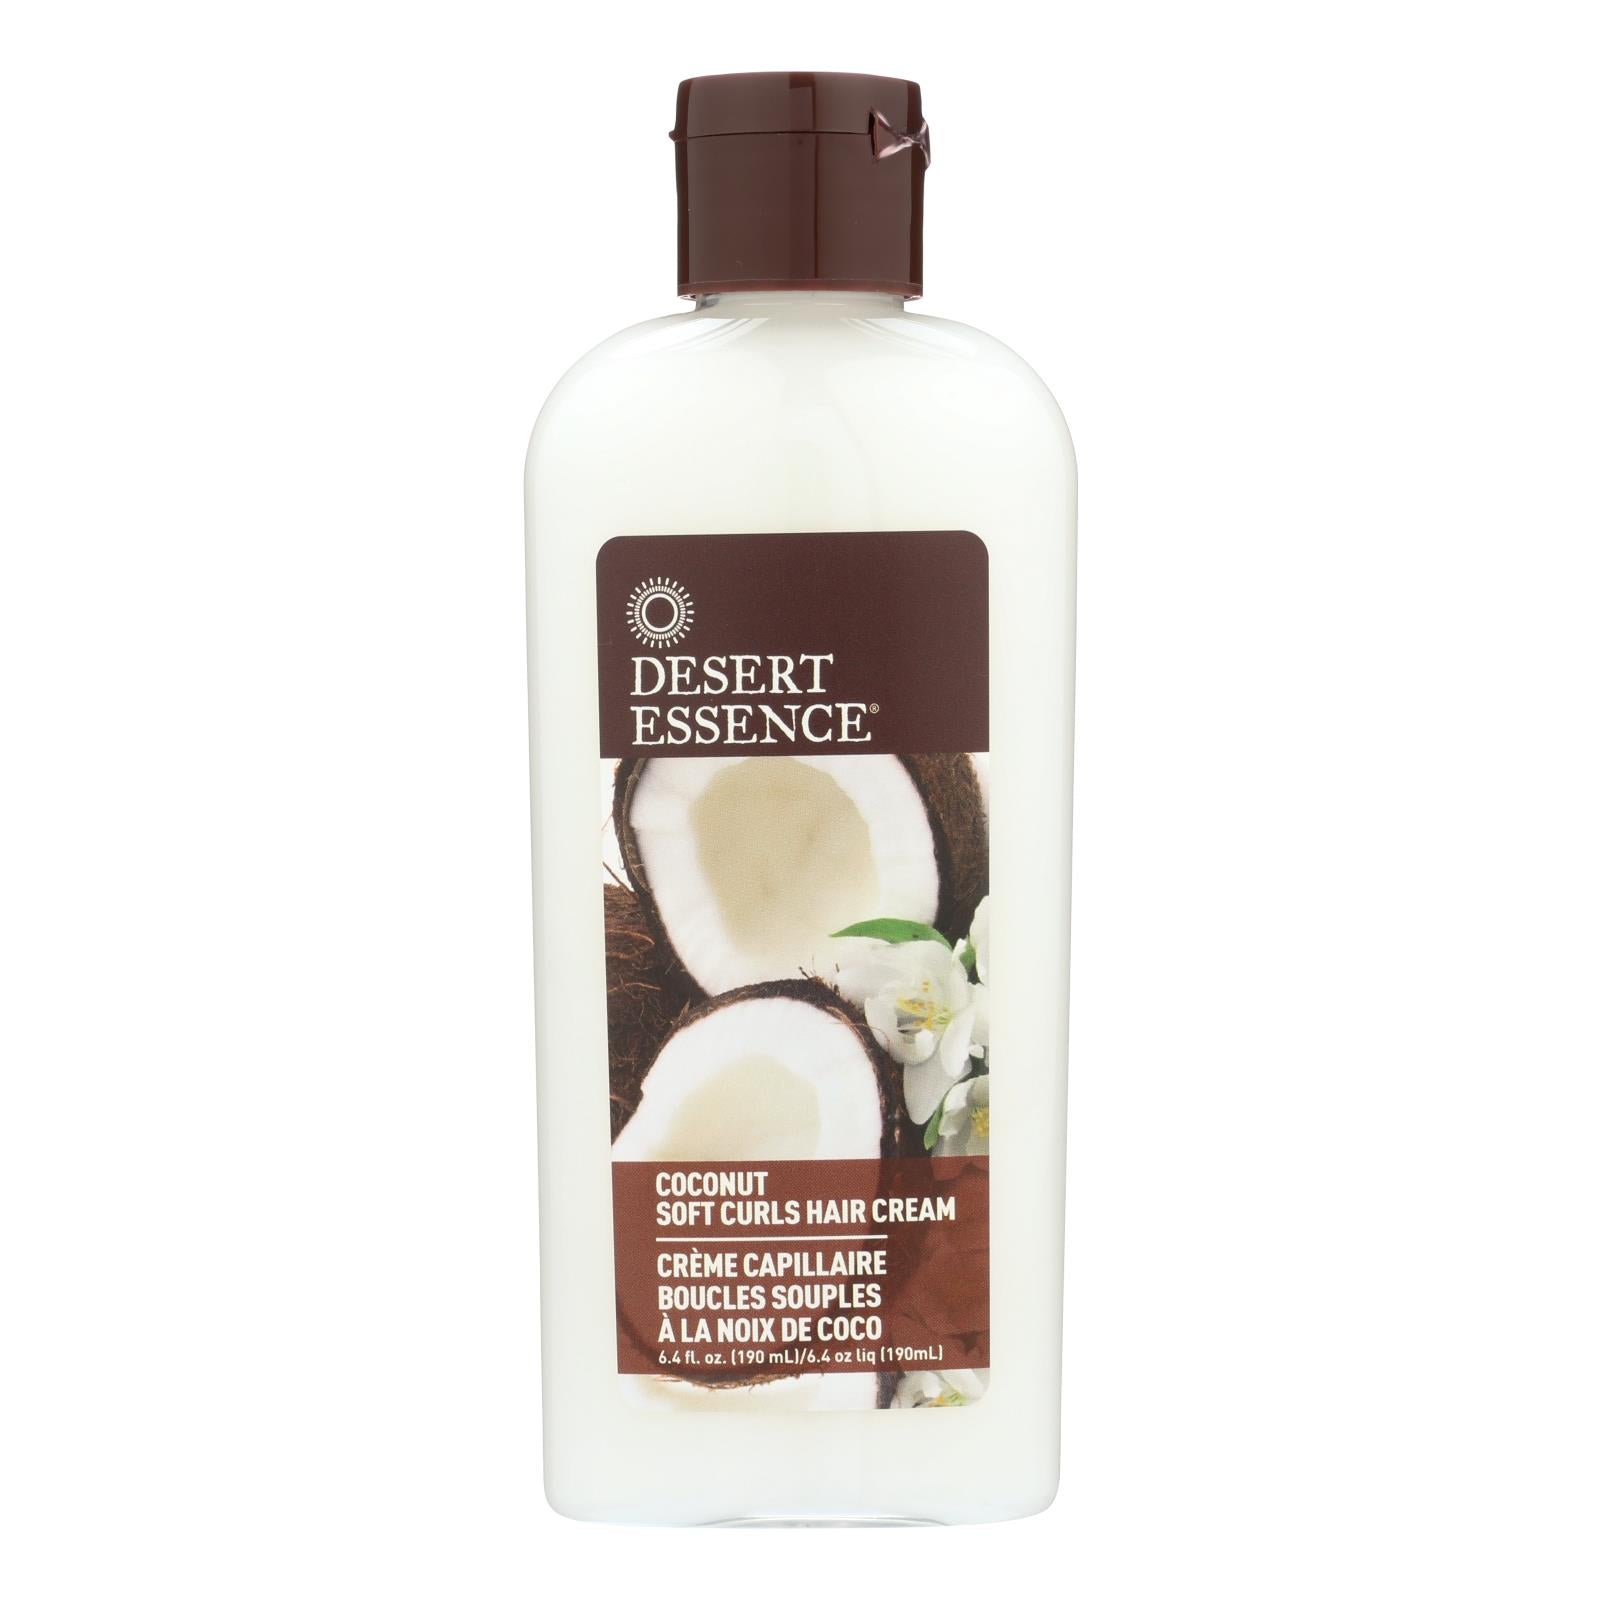 COCONUT SHAMPOO & CONDITIONER VALUE PACK by Desert Essence